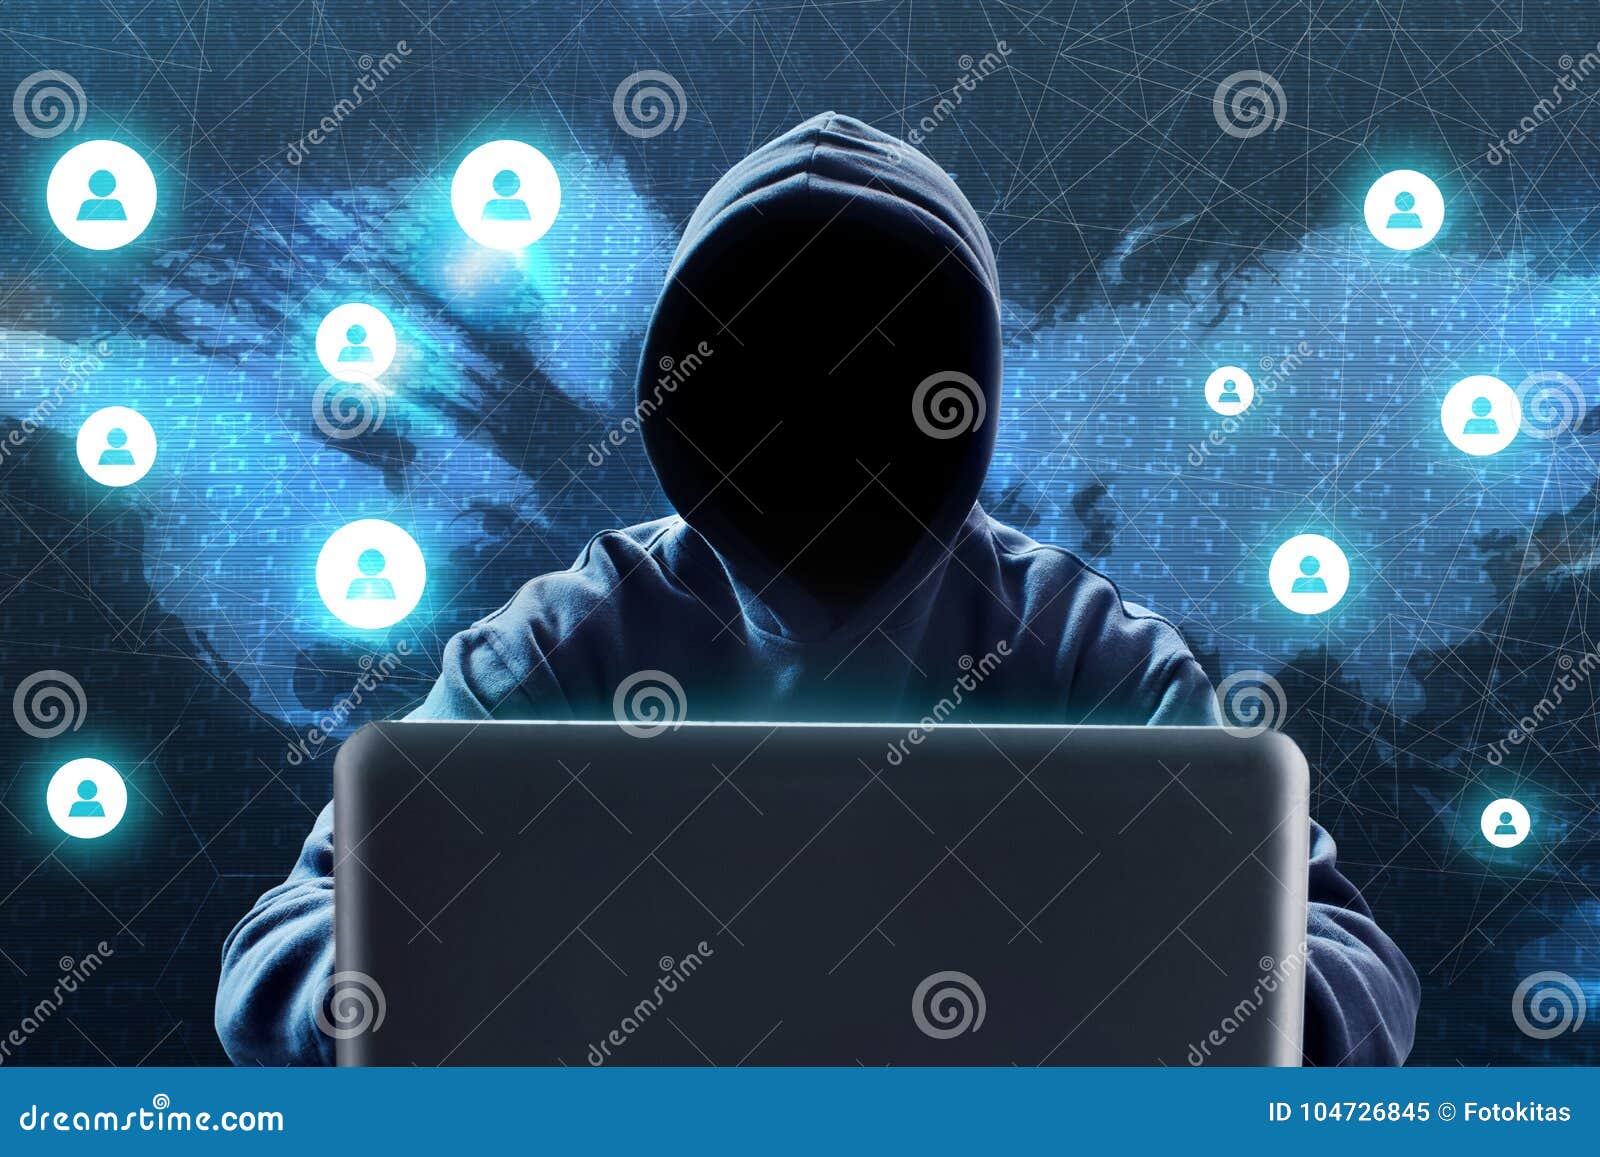 anonymous hacker using laptop on technology background